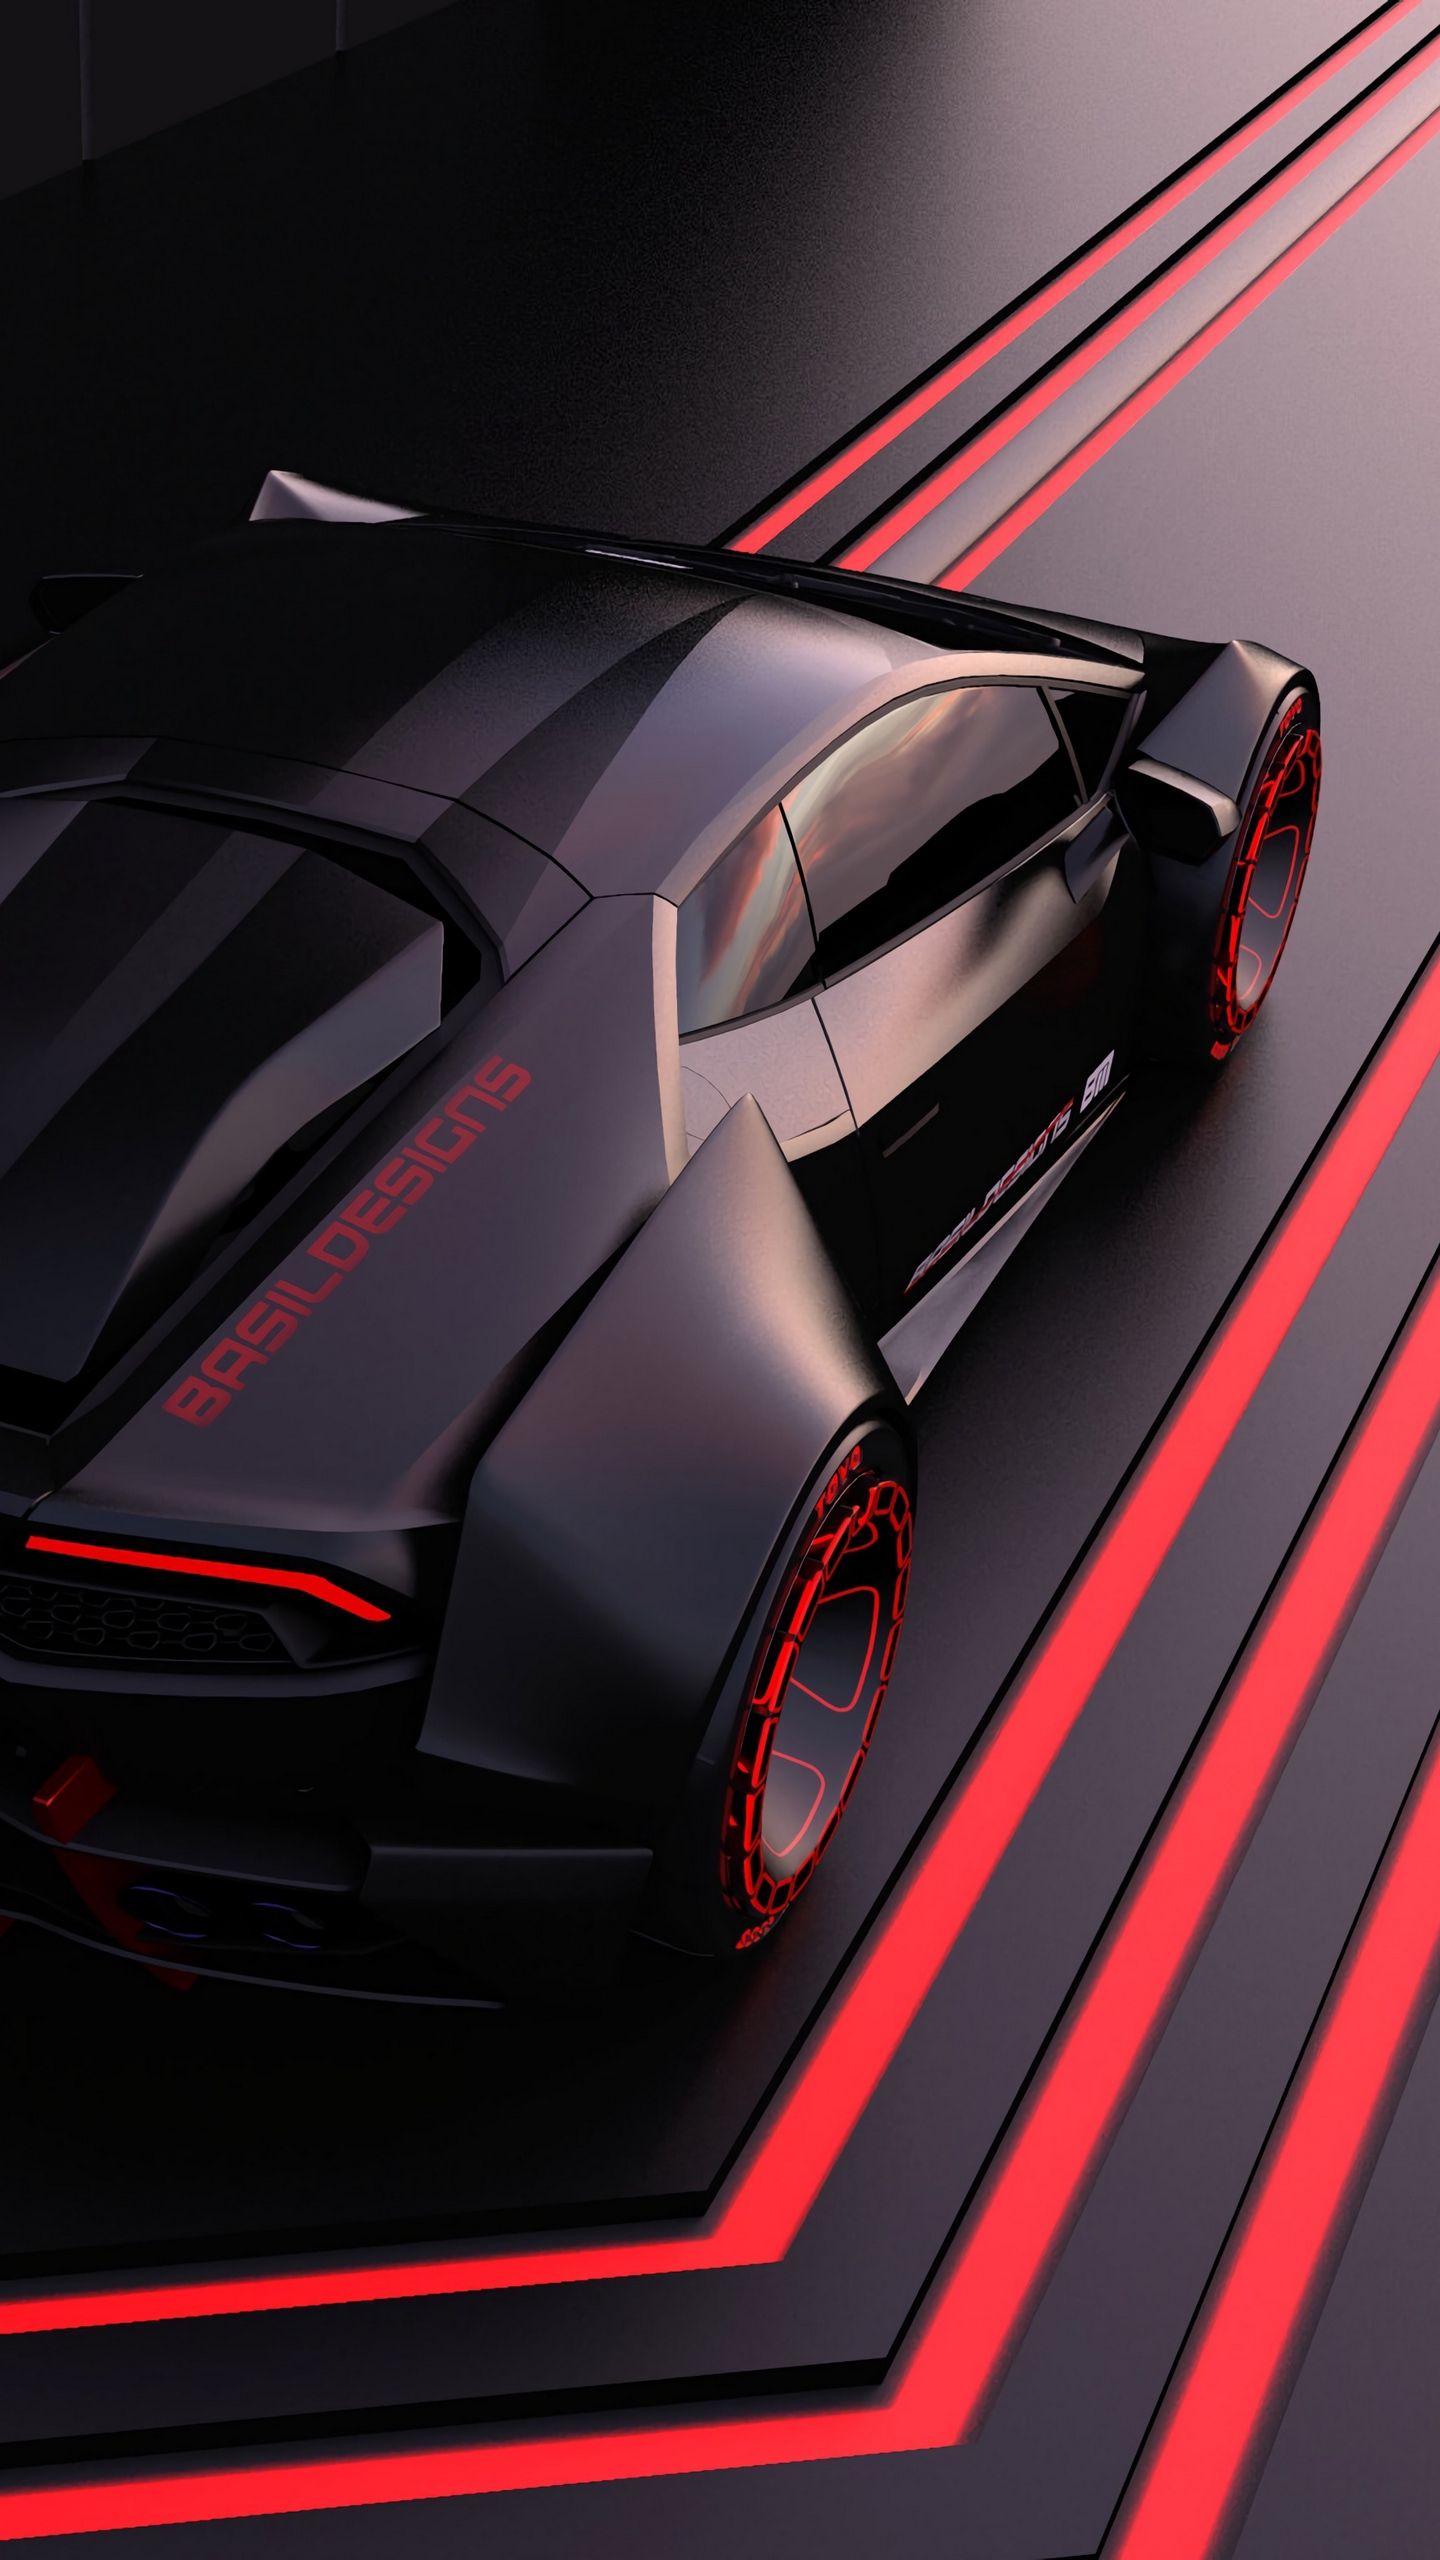 Red and Black Car Wallpaper